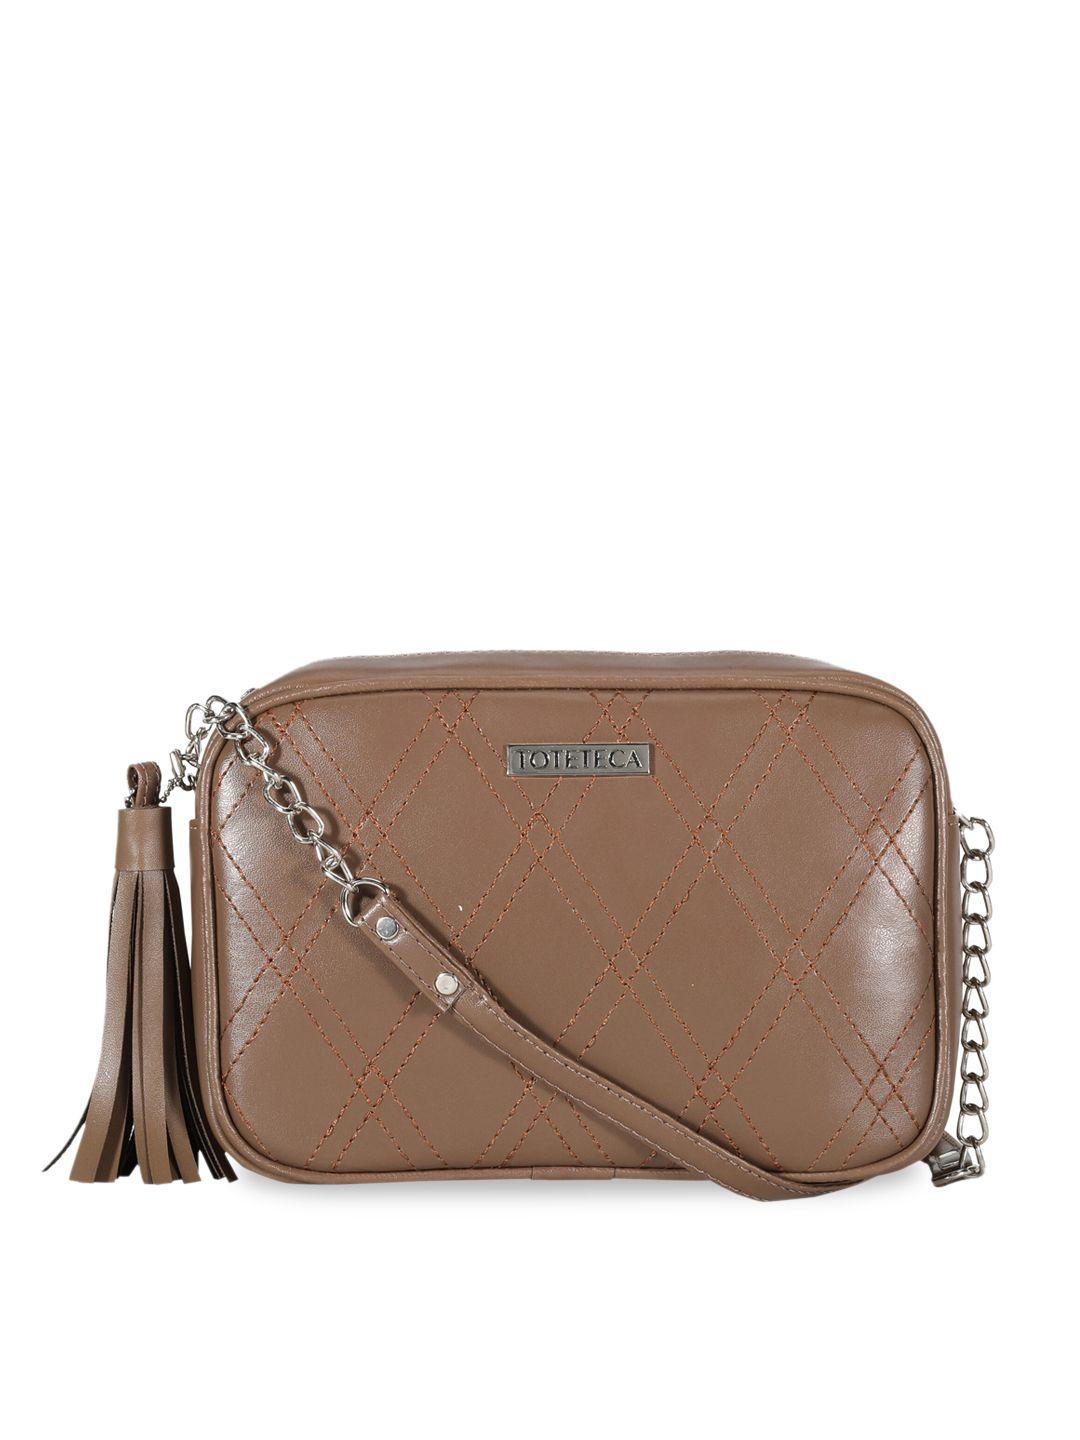 toteteca brown textured pu structured sling bag with tasselled